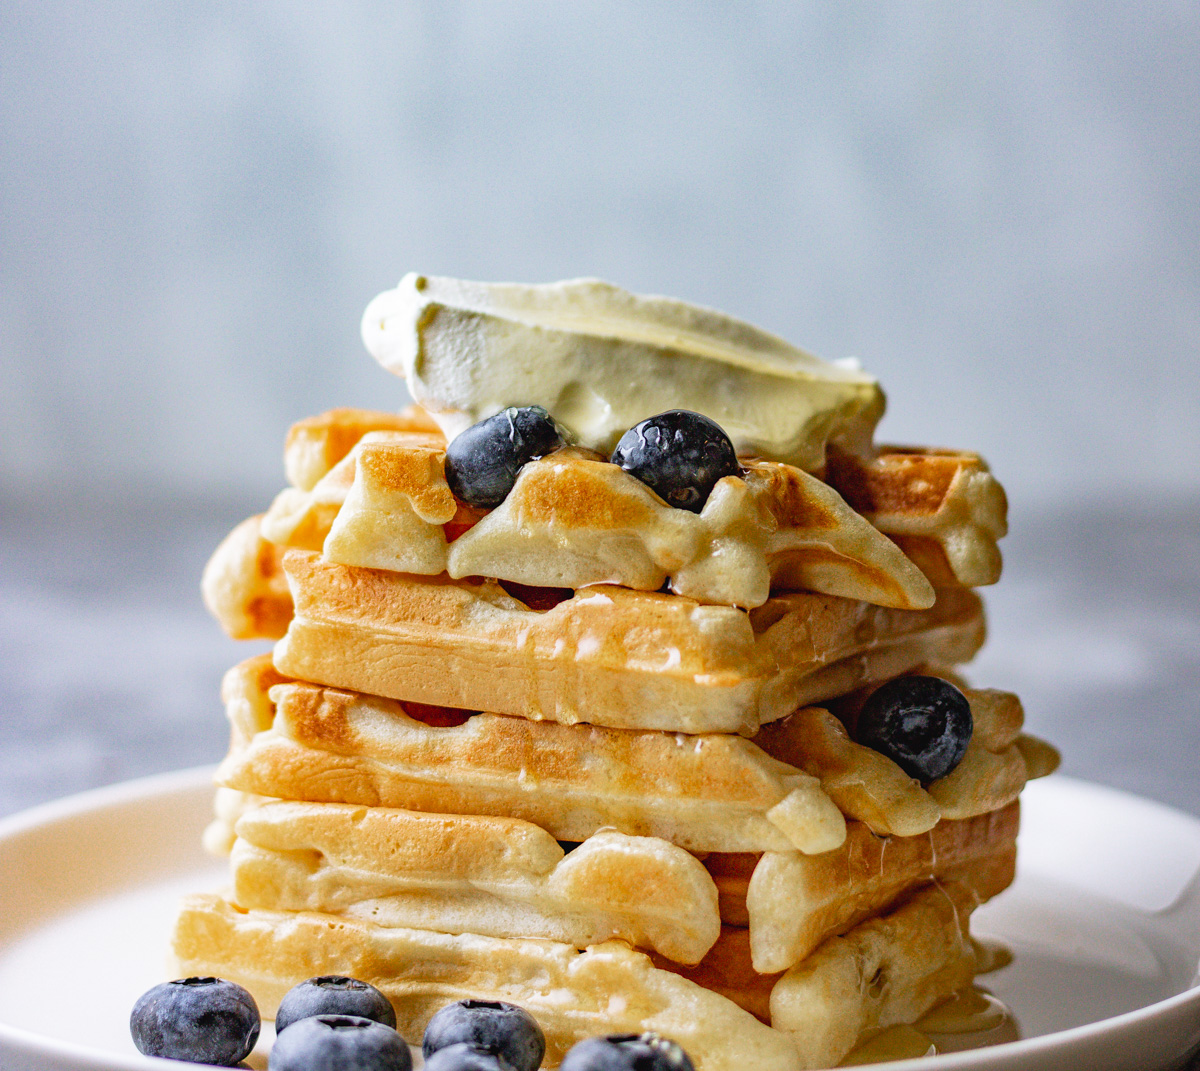 waffles topped with fresh blueberries an cream.